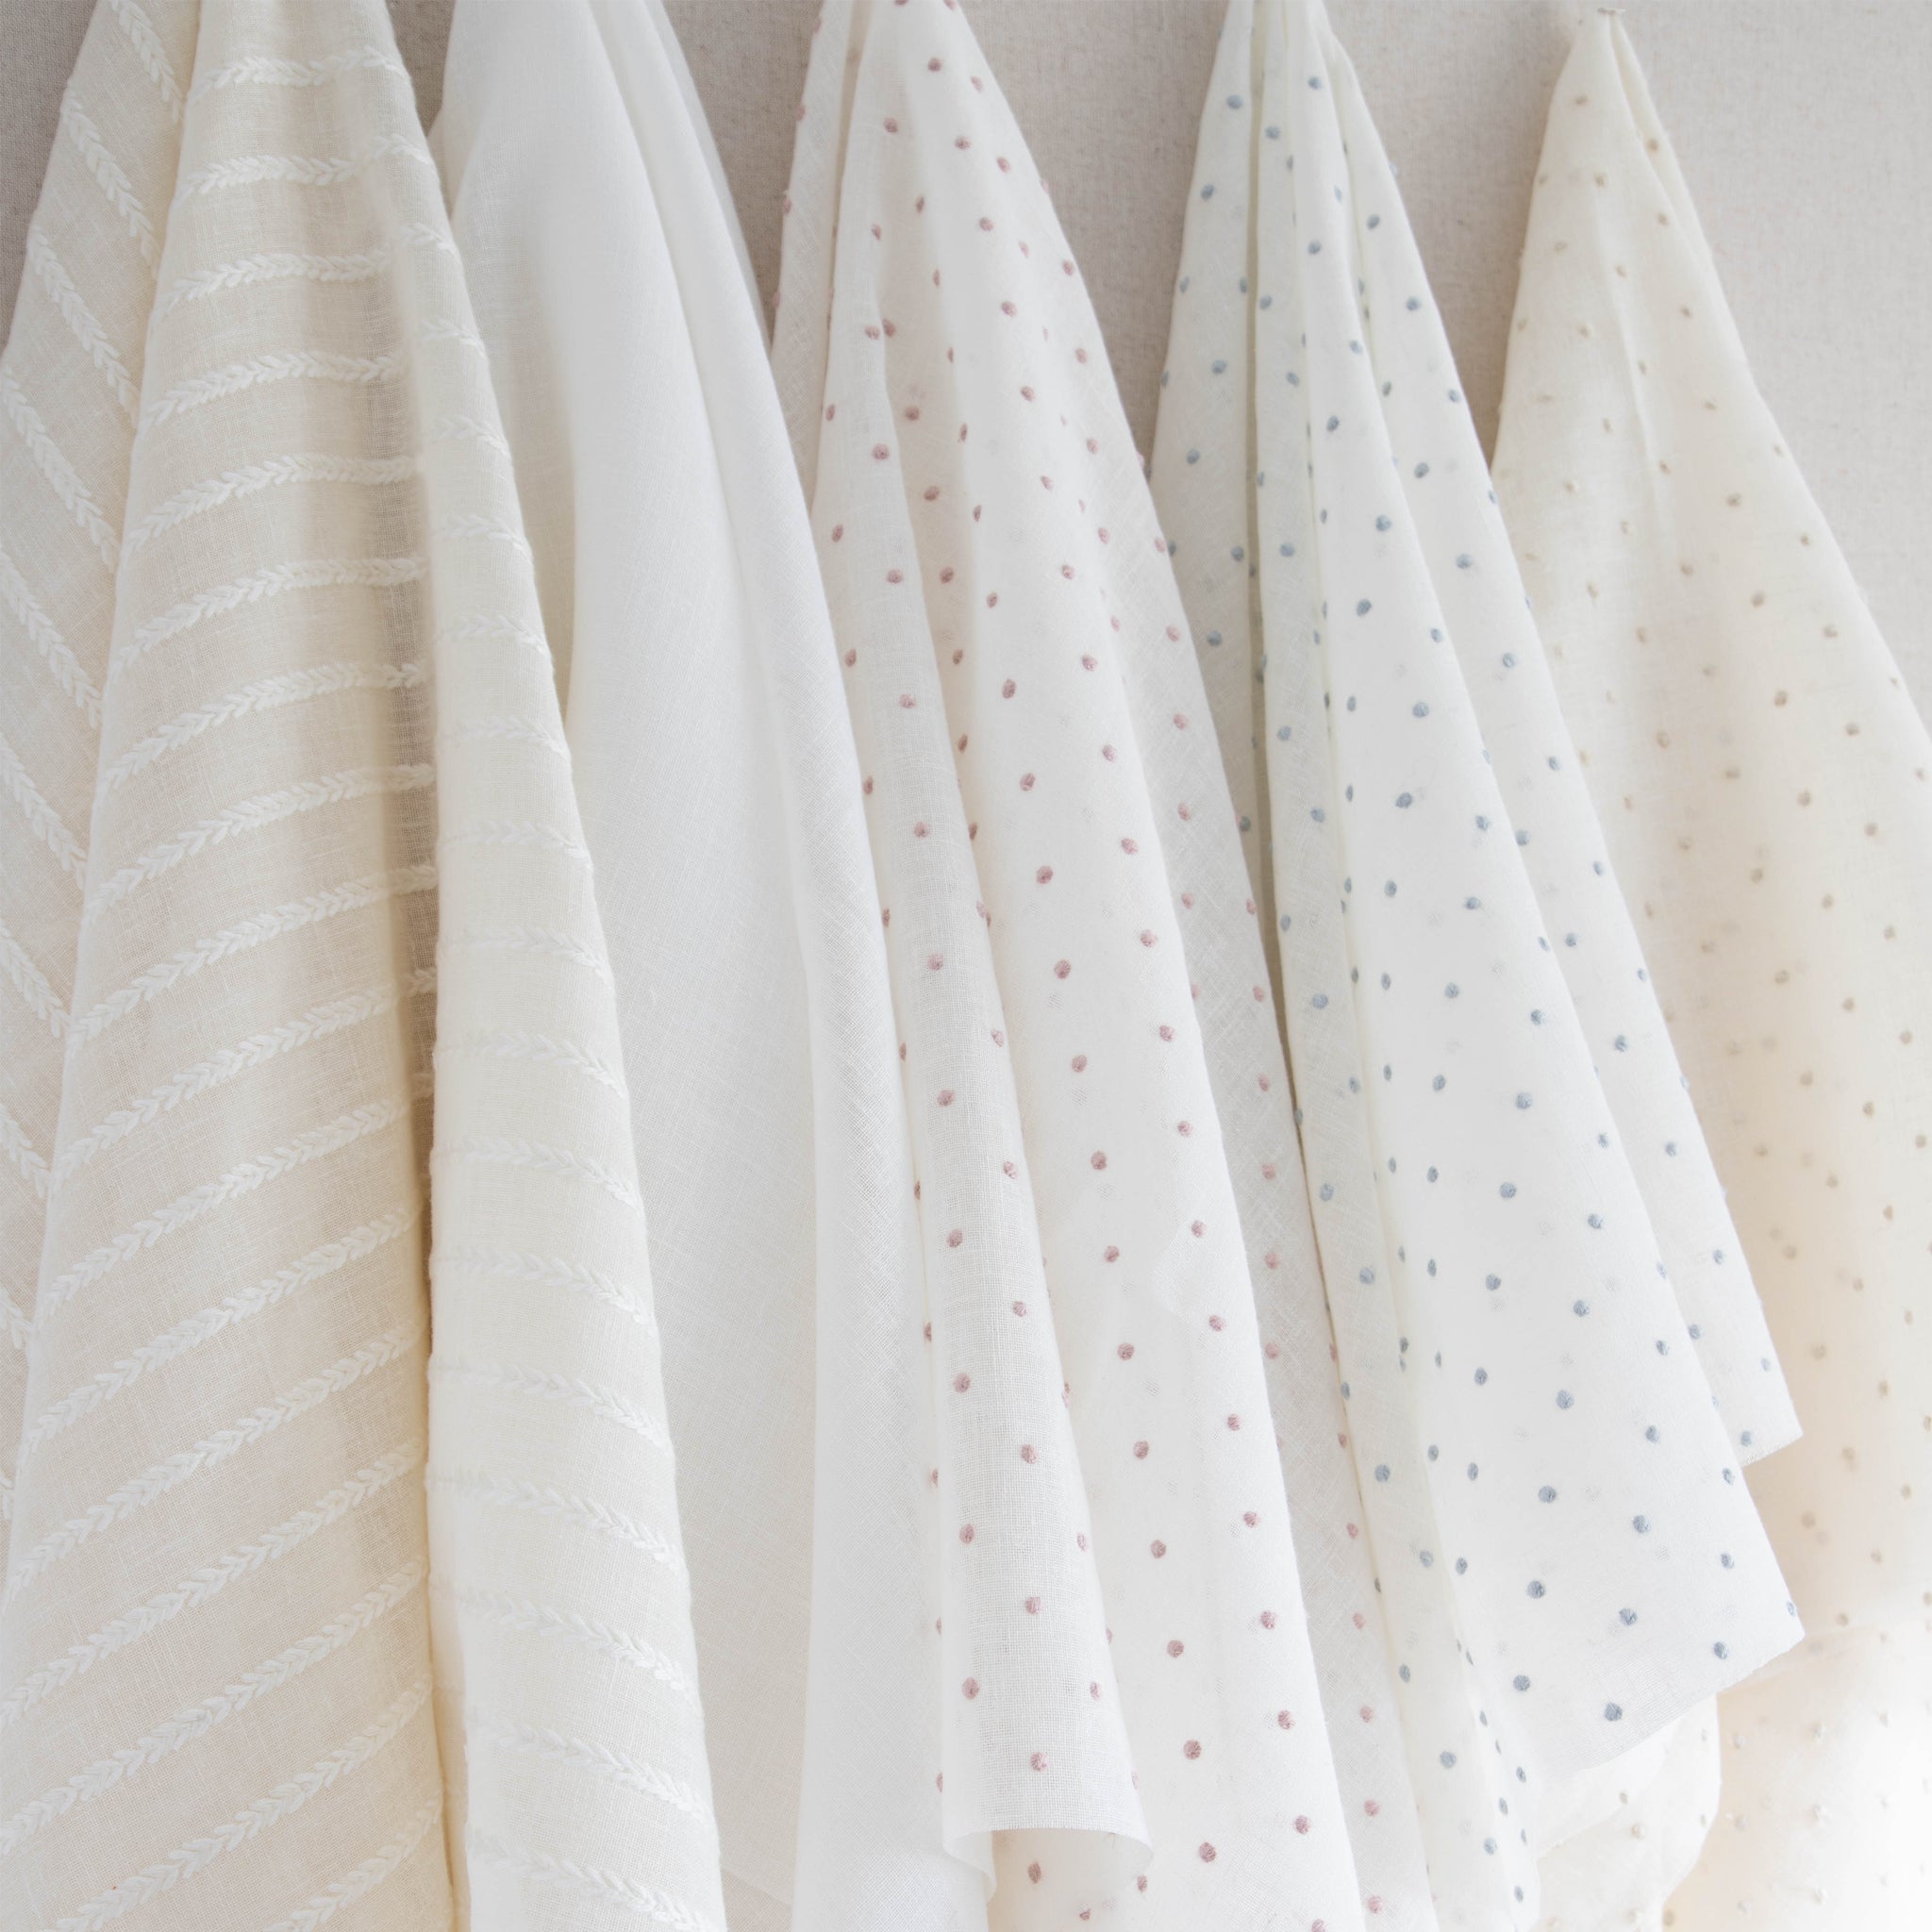 interior design mood board with sheer white fabric, sheer natural fabric with white embroidered stripes, sheer white fabric with cream embroidered polka dots, sheer white fabric with blue embroidered polka dots and sheer white fabric with embroidered pink polka dots  